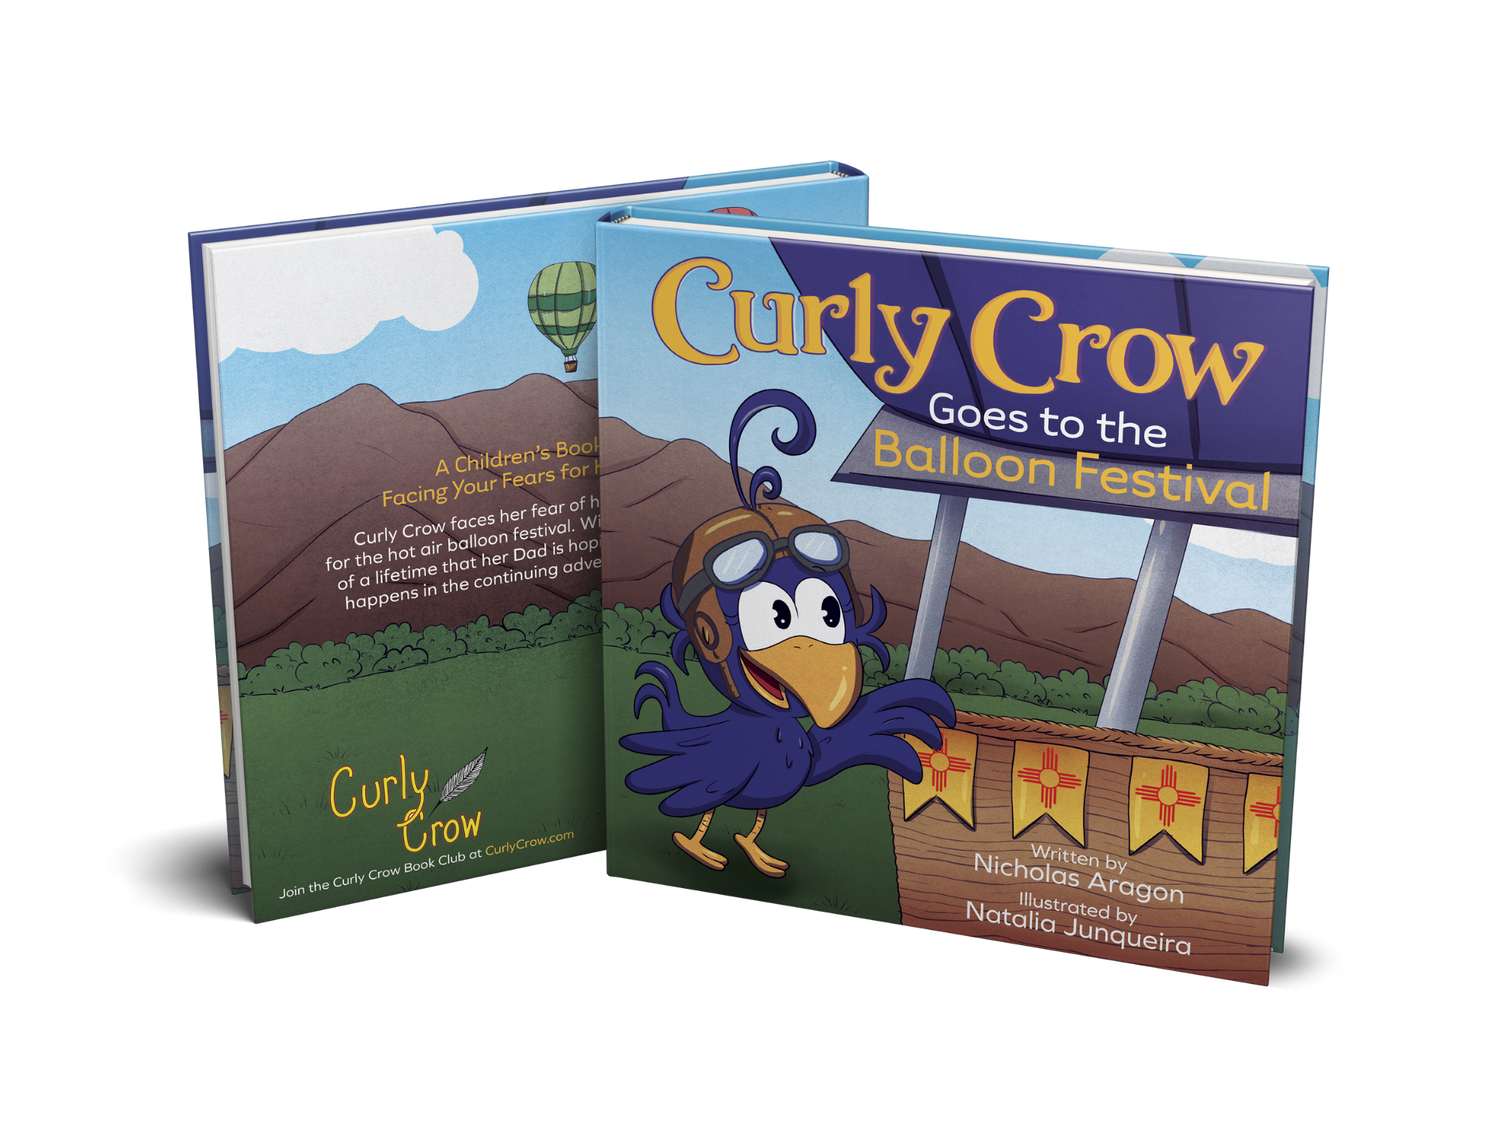 Curly Crow Book Cover Learning to fly a hot air balloon - Facing Fears